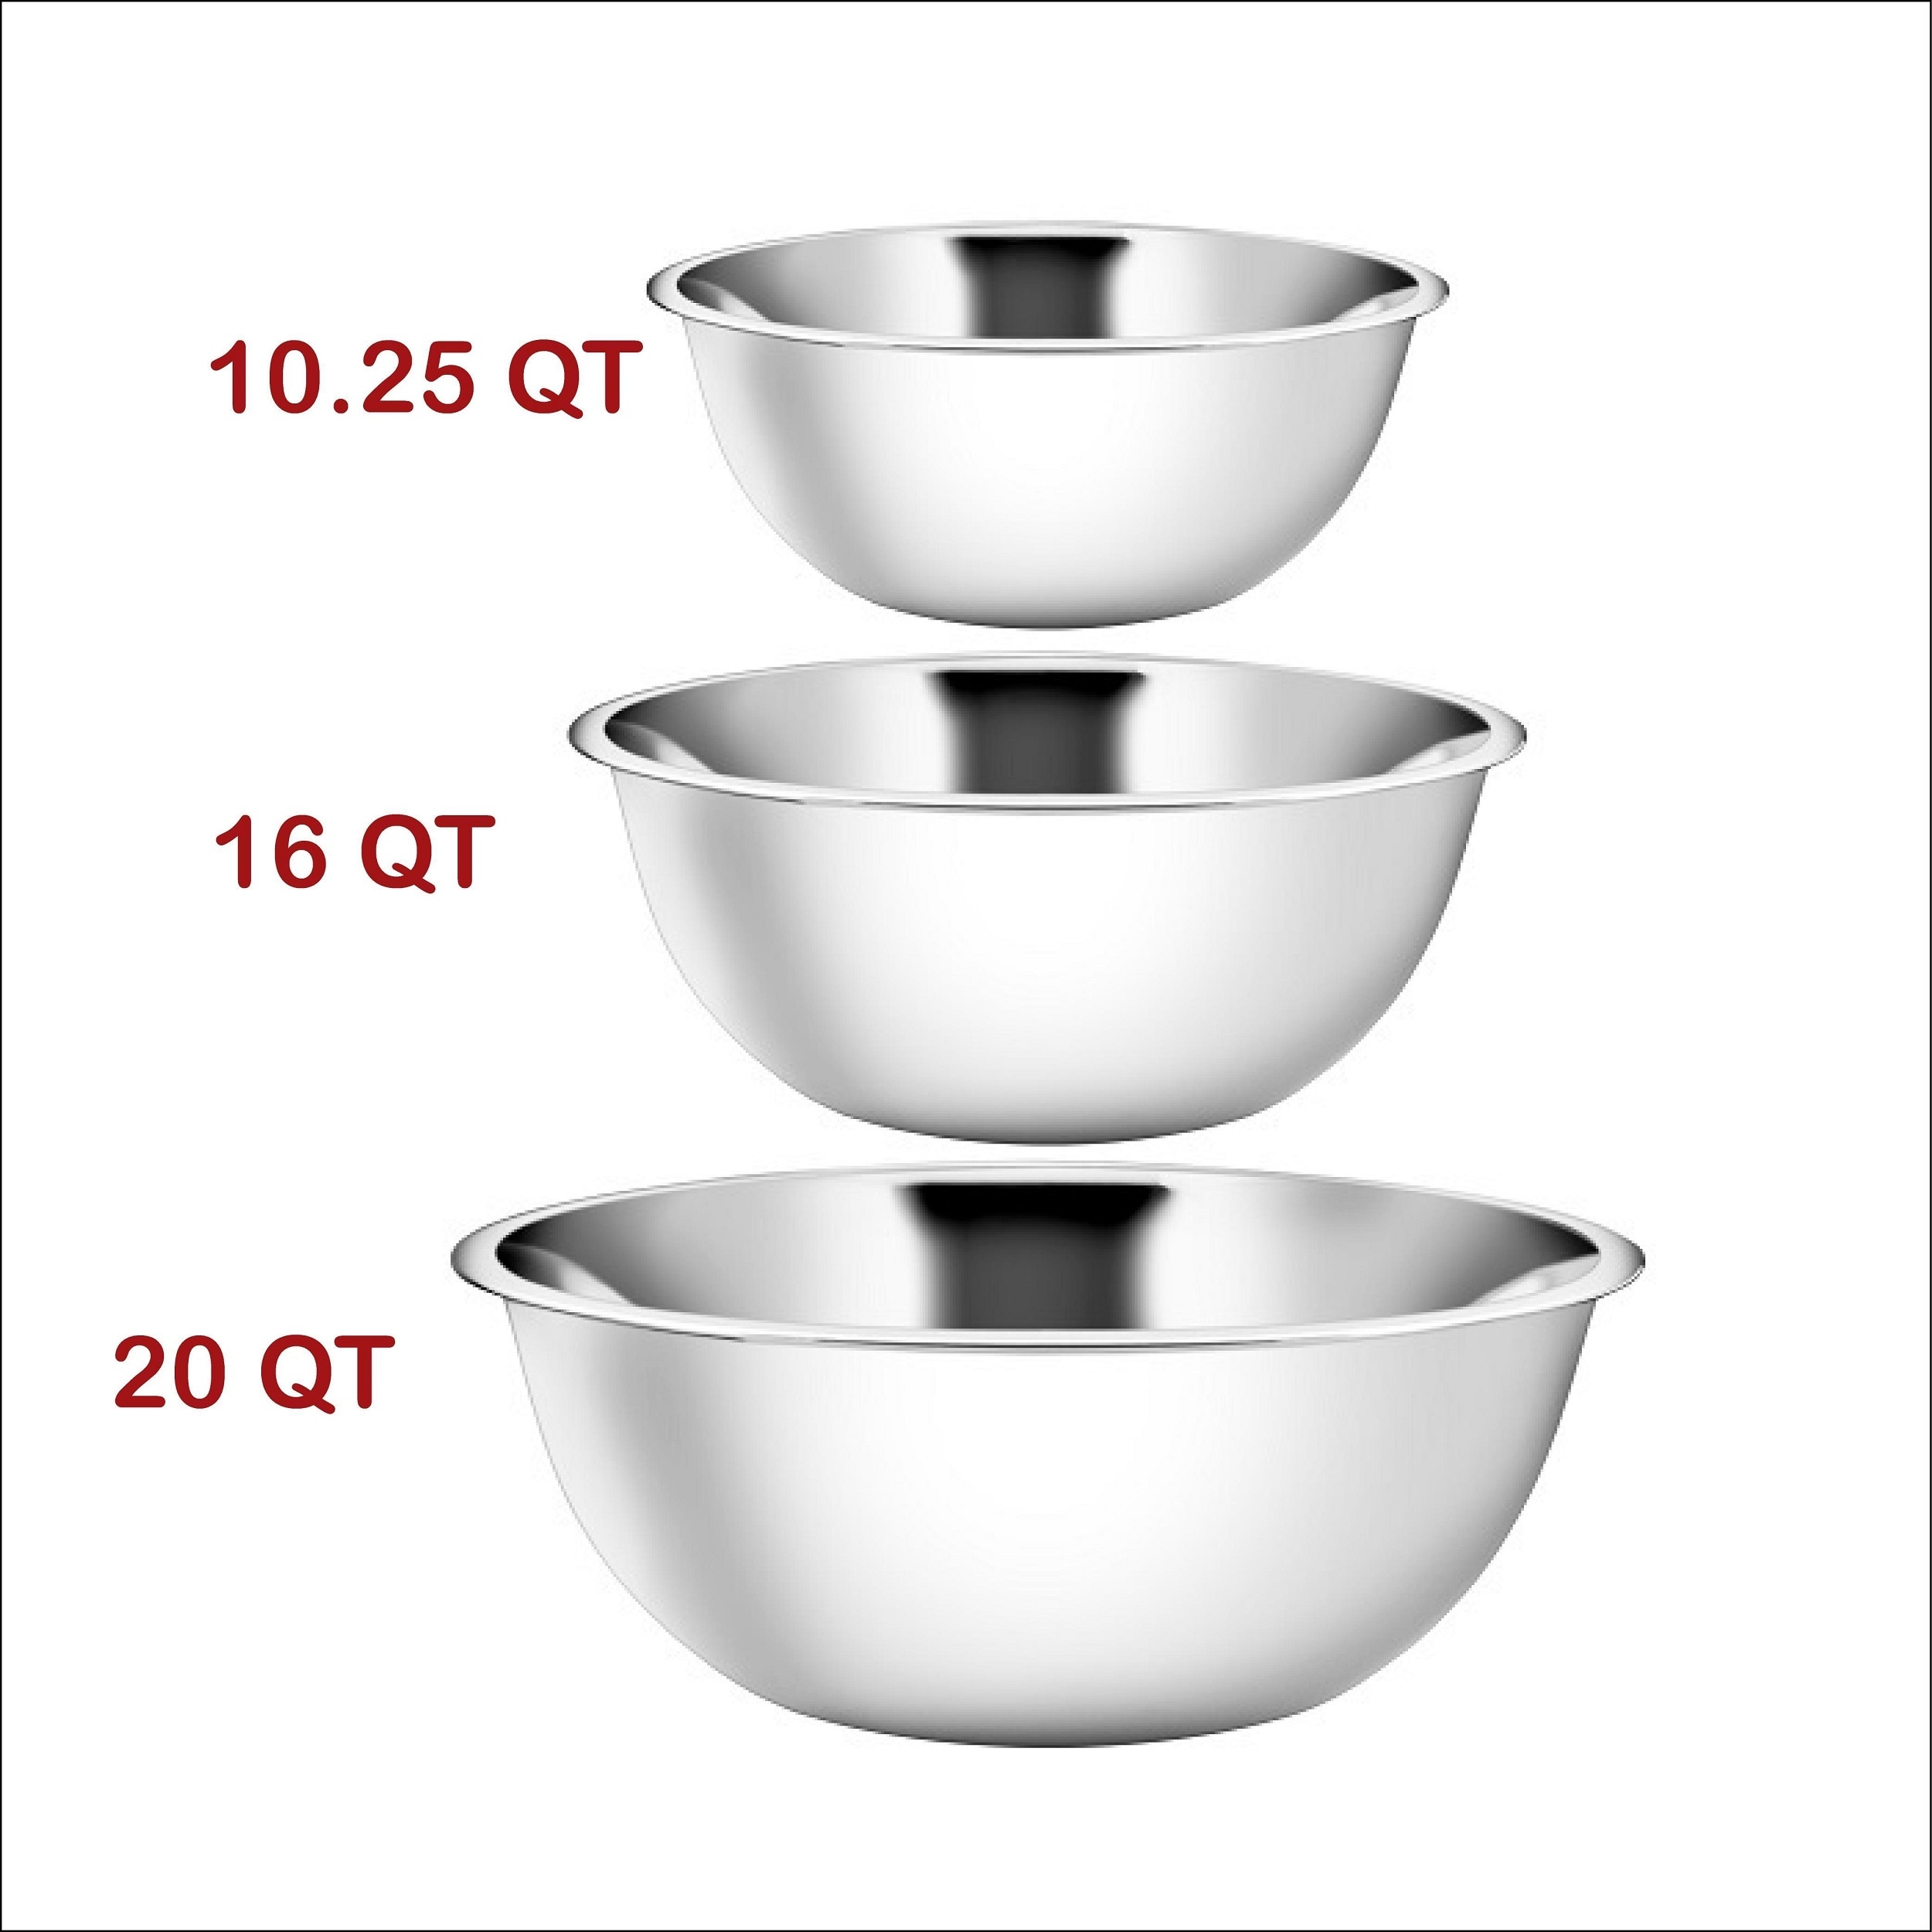 https://ak1.ostkcdn.com/images/products/is/images/direct/2b871783dab1f22d7e94b3ab25581c0579be8d9e/Premium-Polished-Mirror-Nesting-Stainless-Steel-Mixing-Bowl.jpg